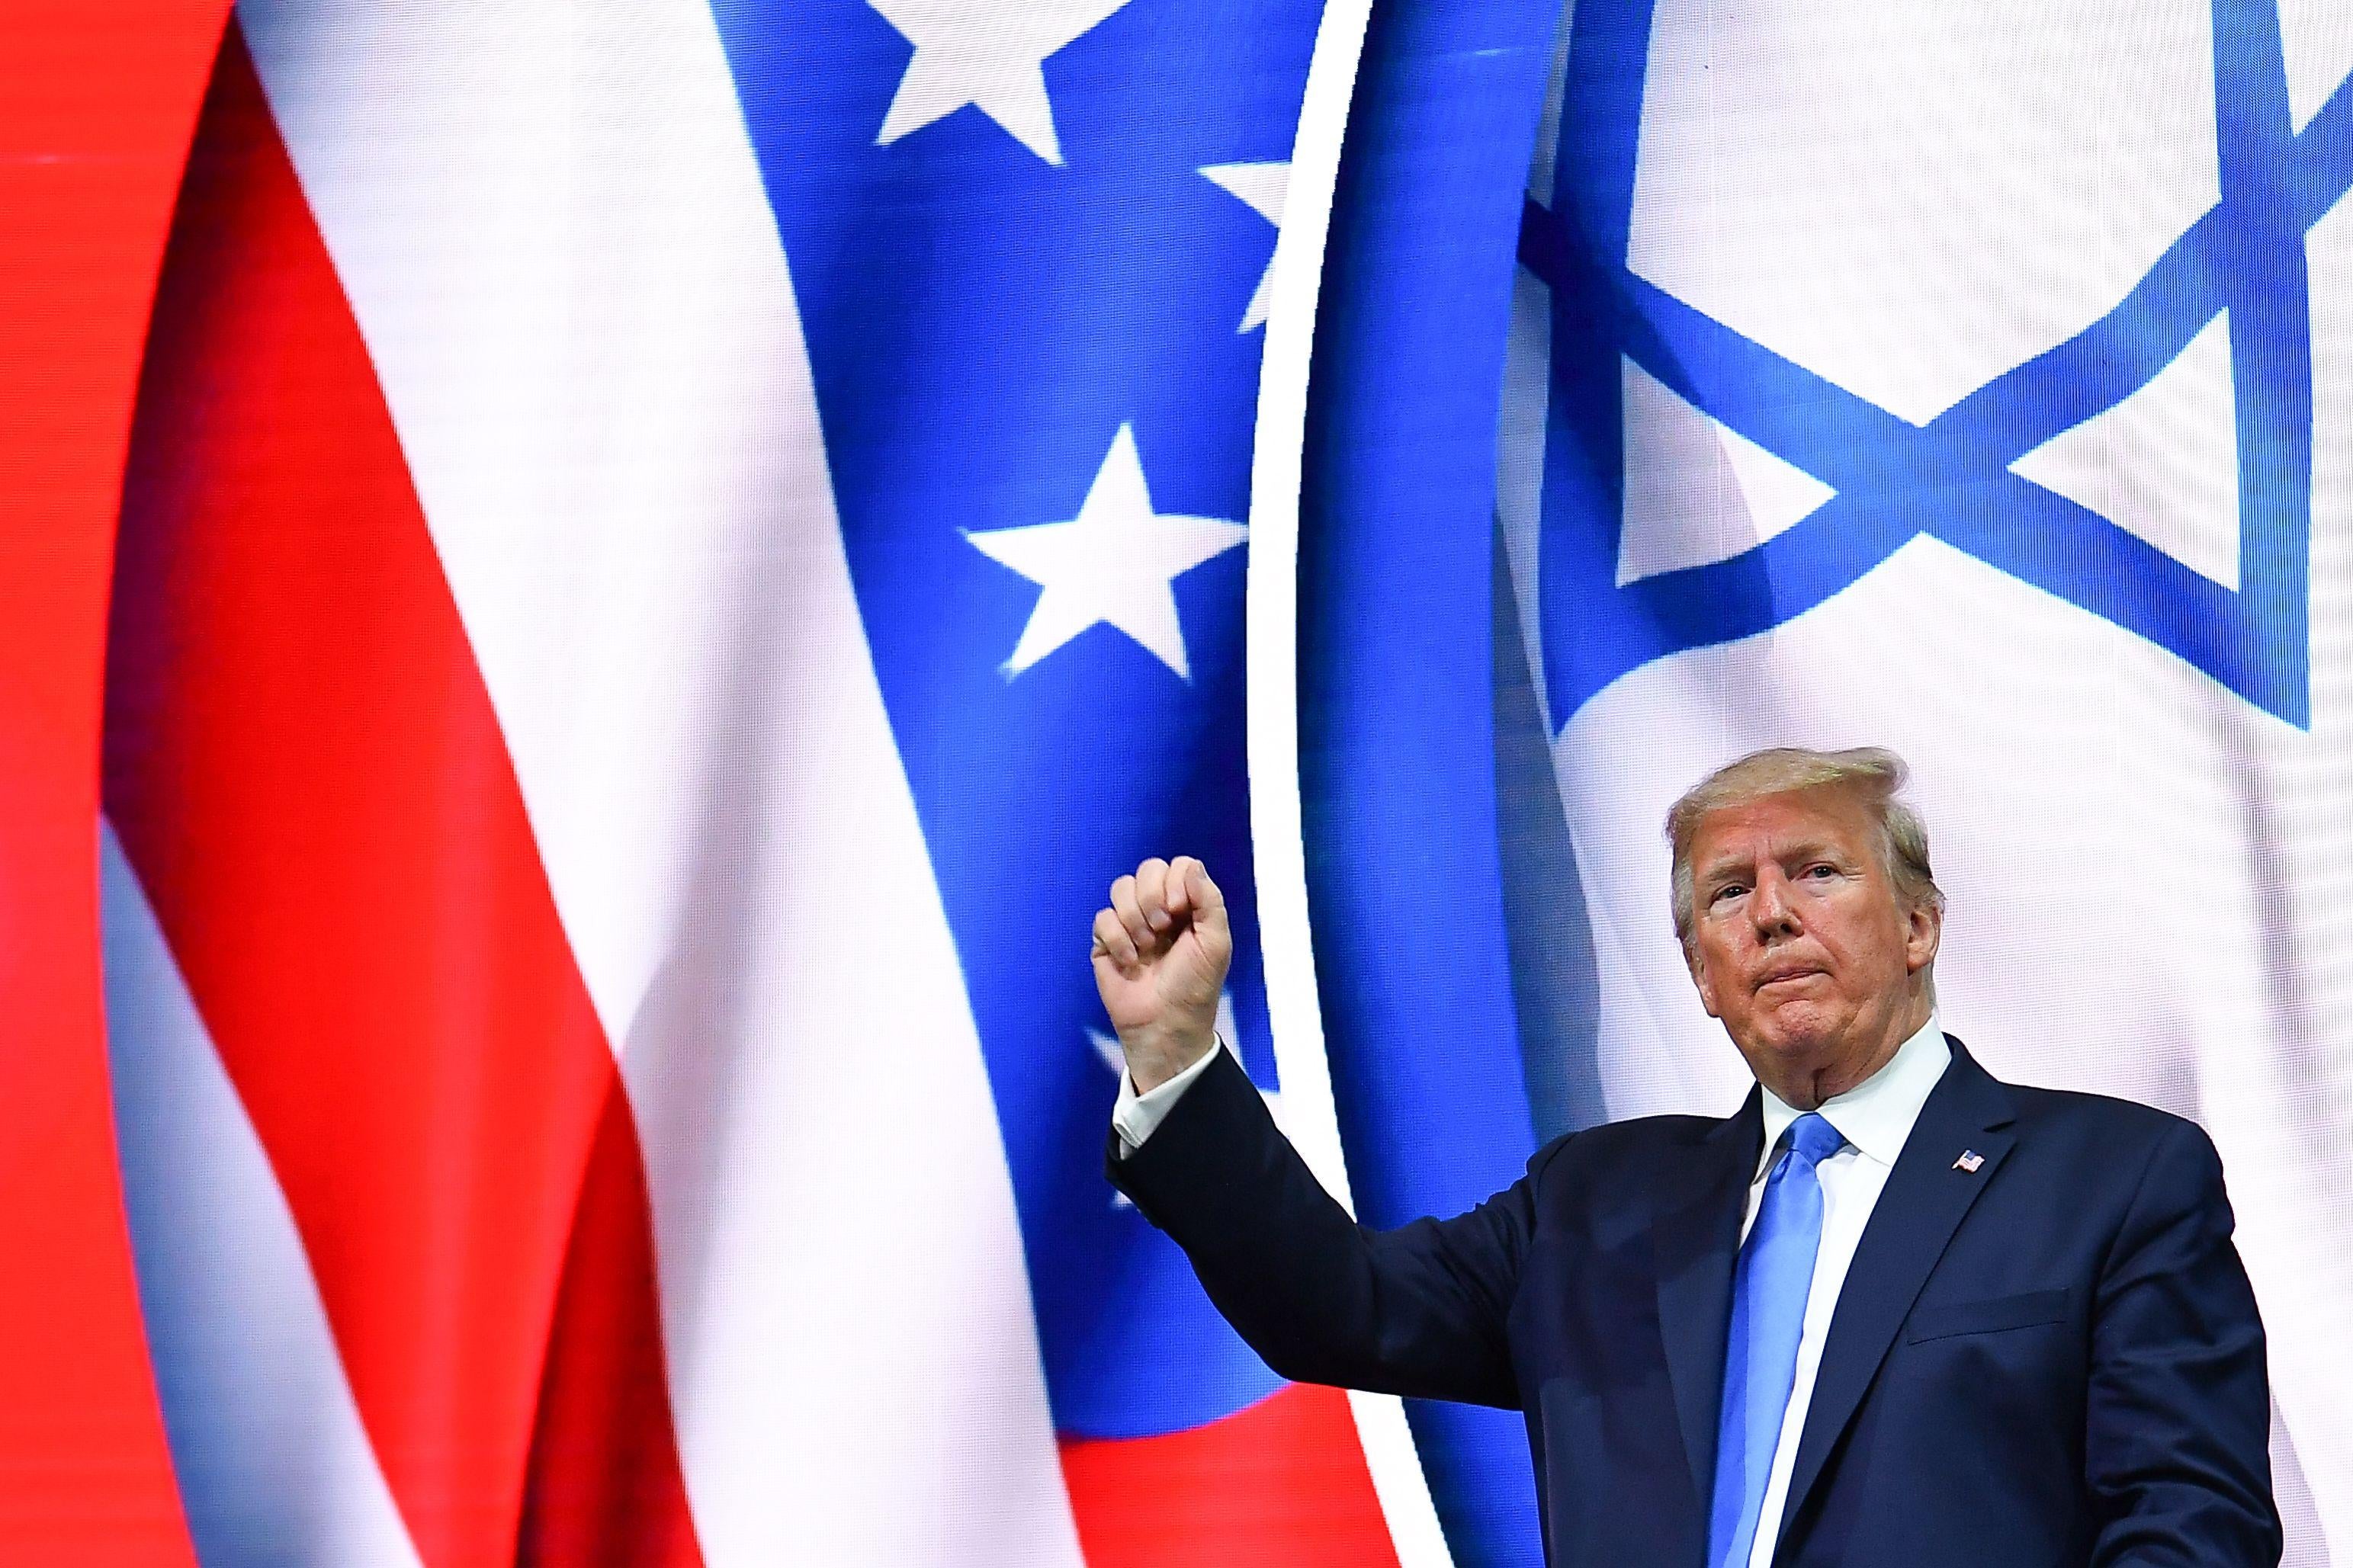 Trump holds up a fist while standing in front of U.S. and Israeli flags.